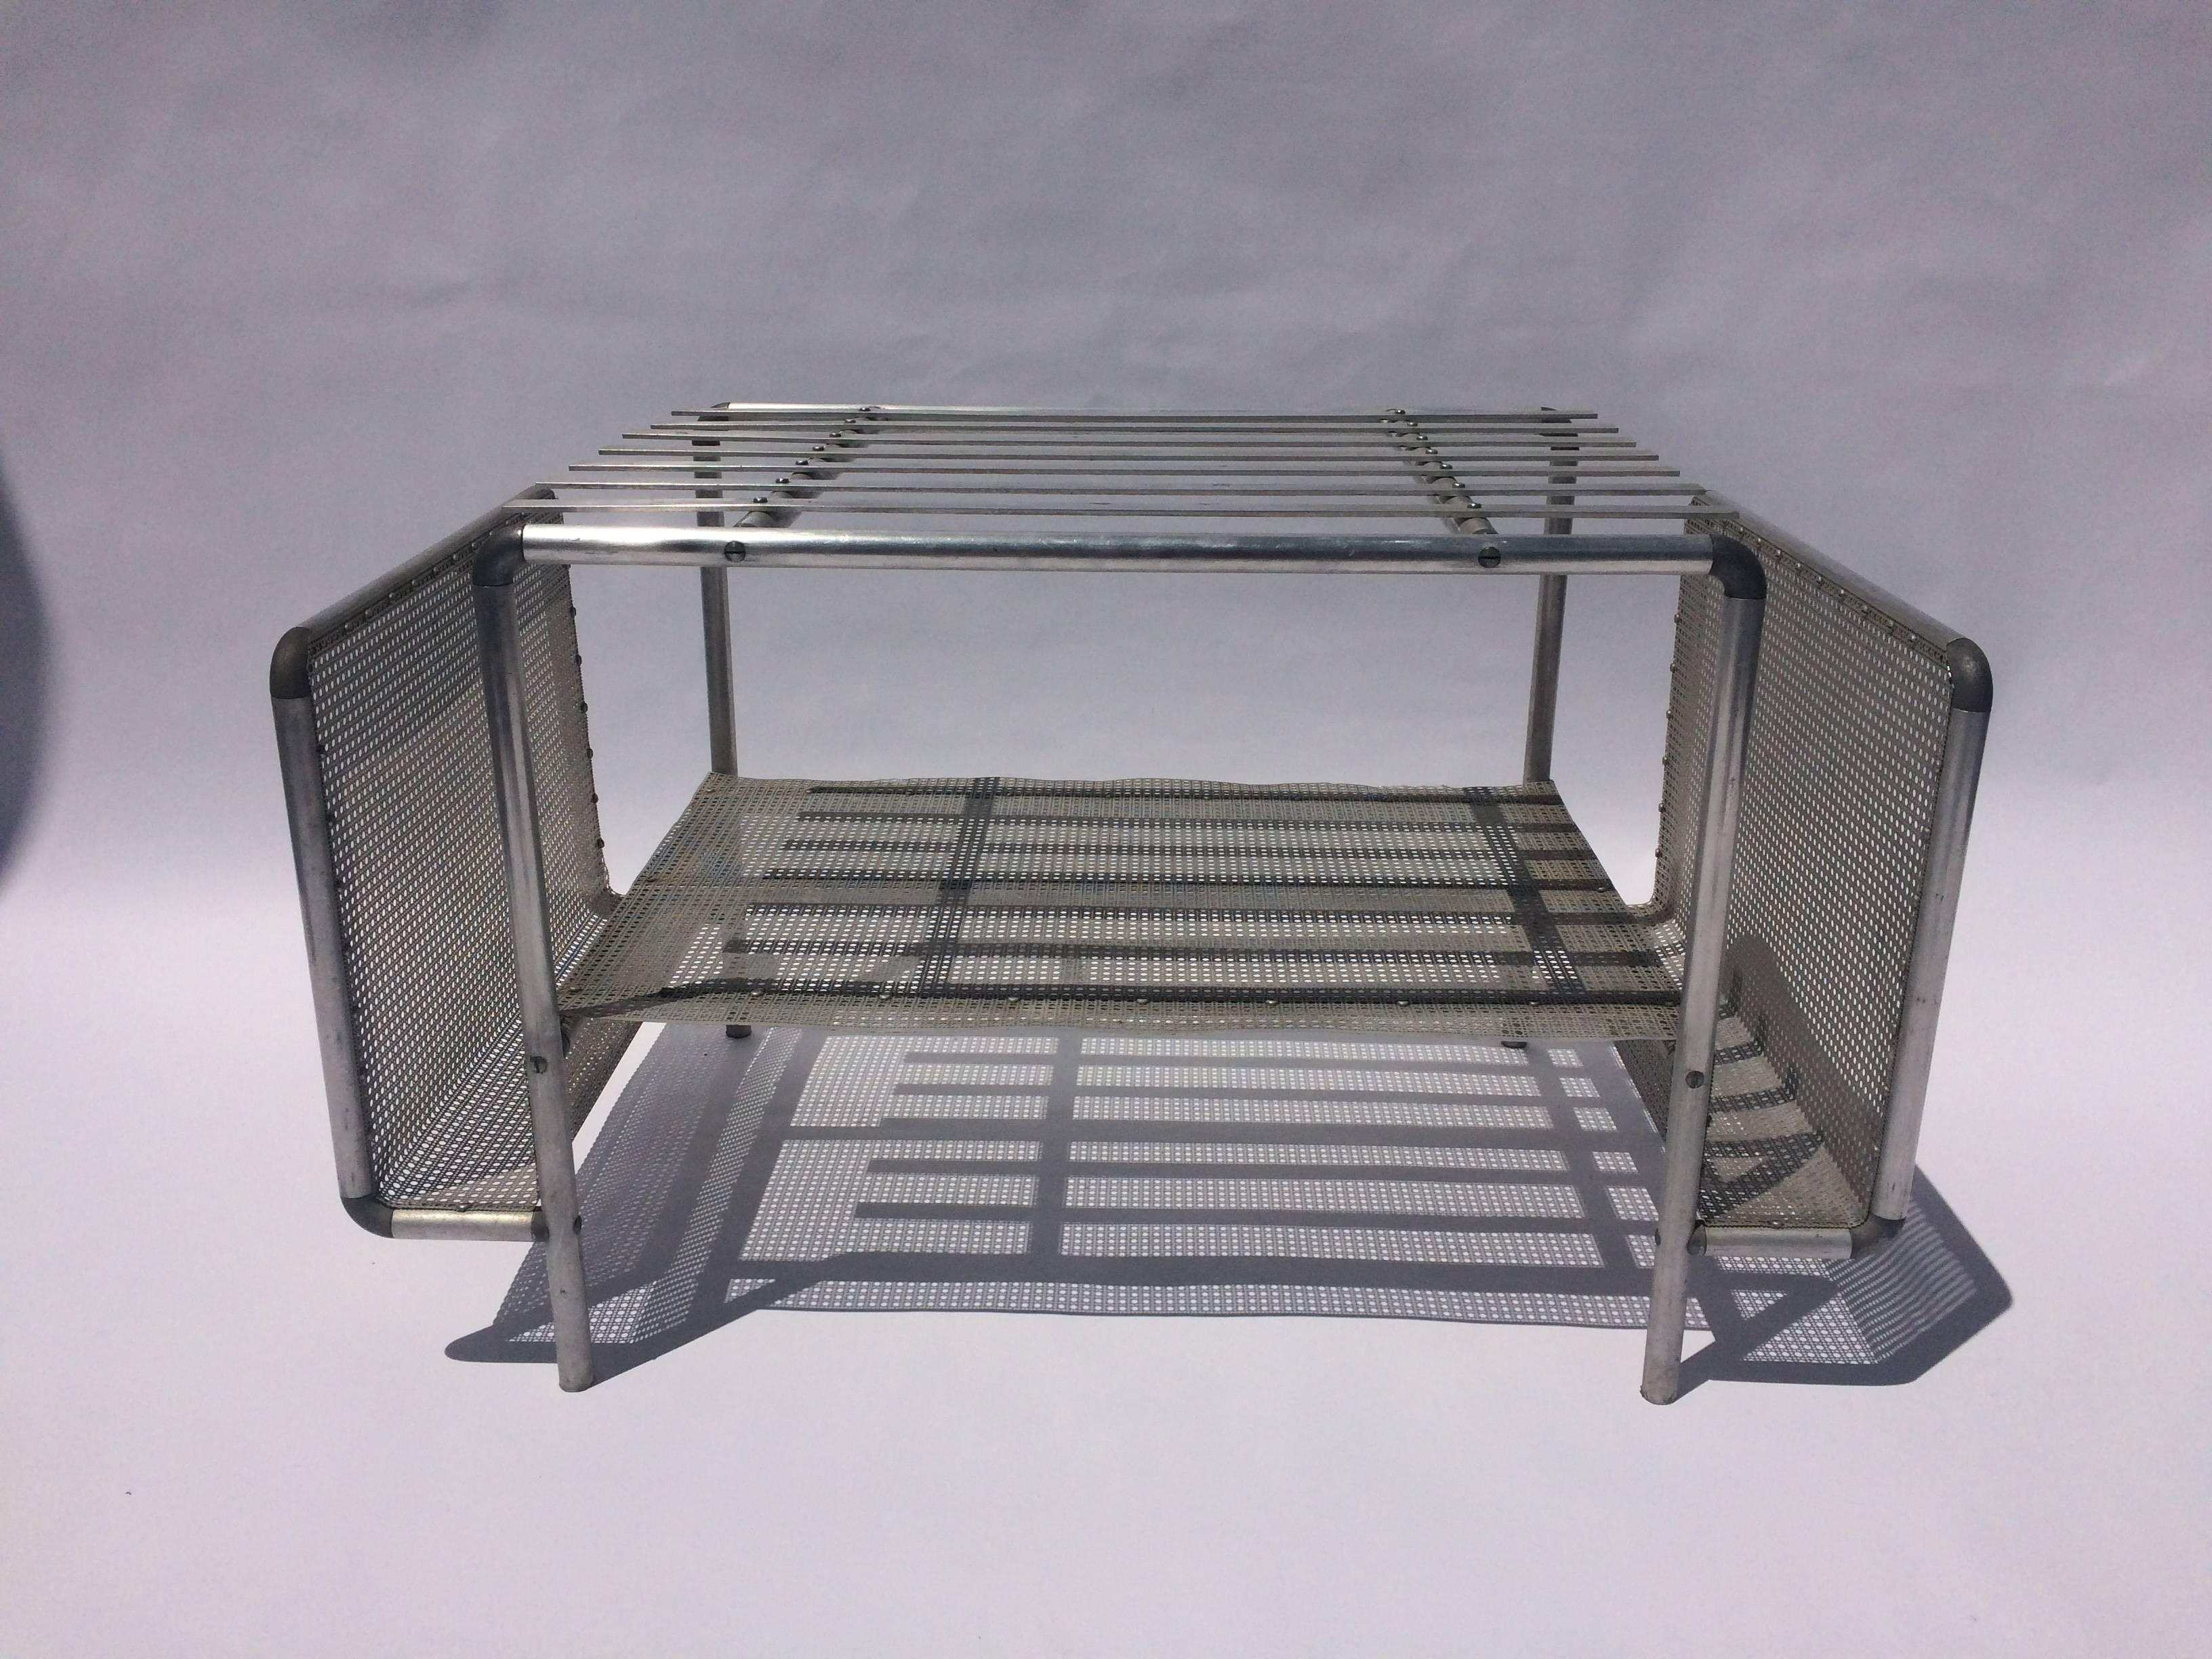 One of a kind table fabricated from aluminium, envoaking a streamline design from the mid-20th century.